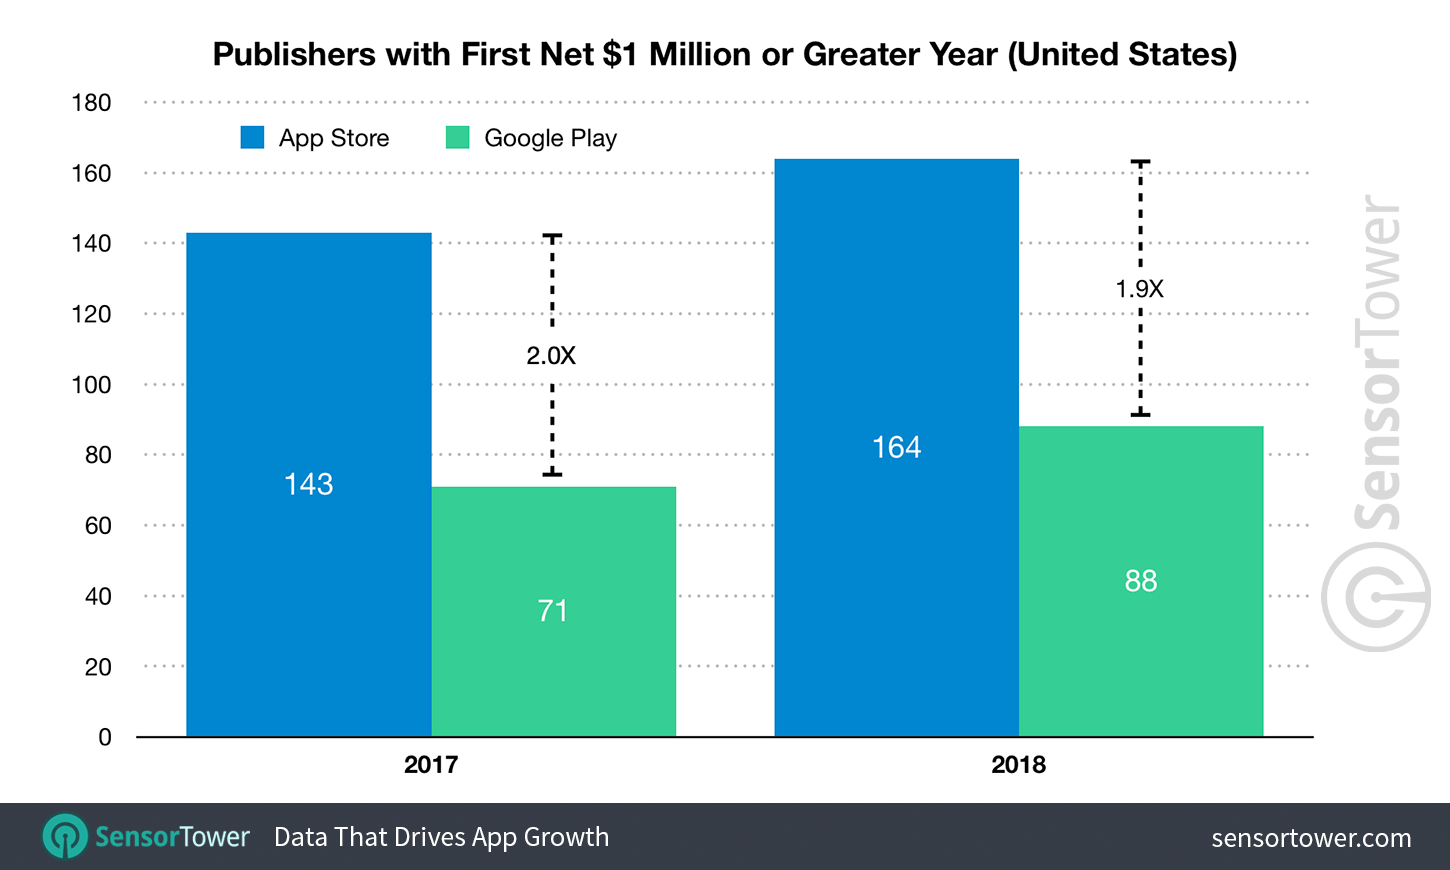 Comparison of the number of million-dollar plus publishers on the App Store and Google Play in 2018 an 2017